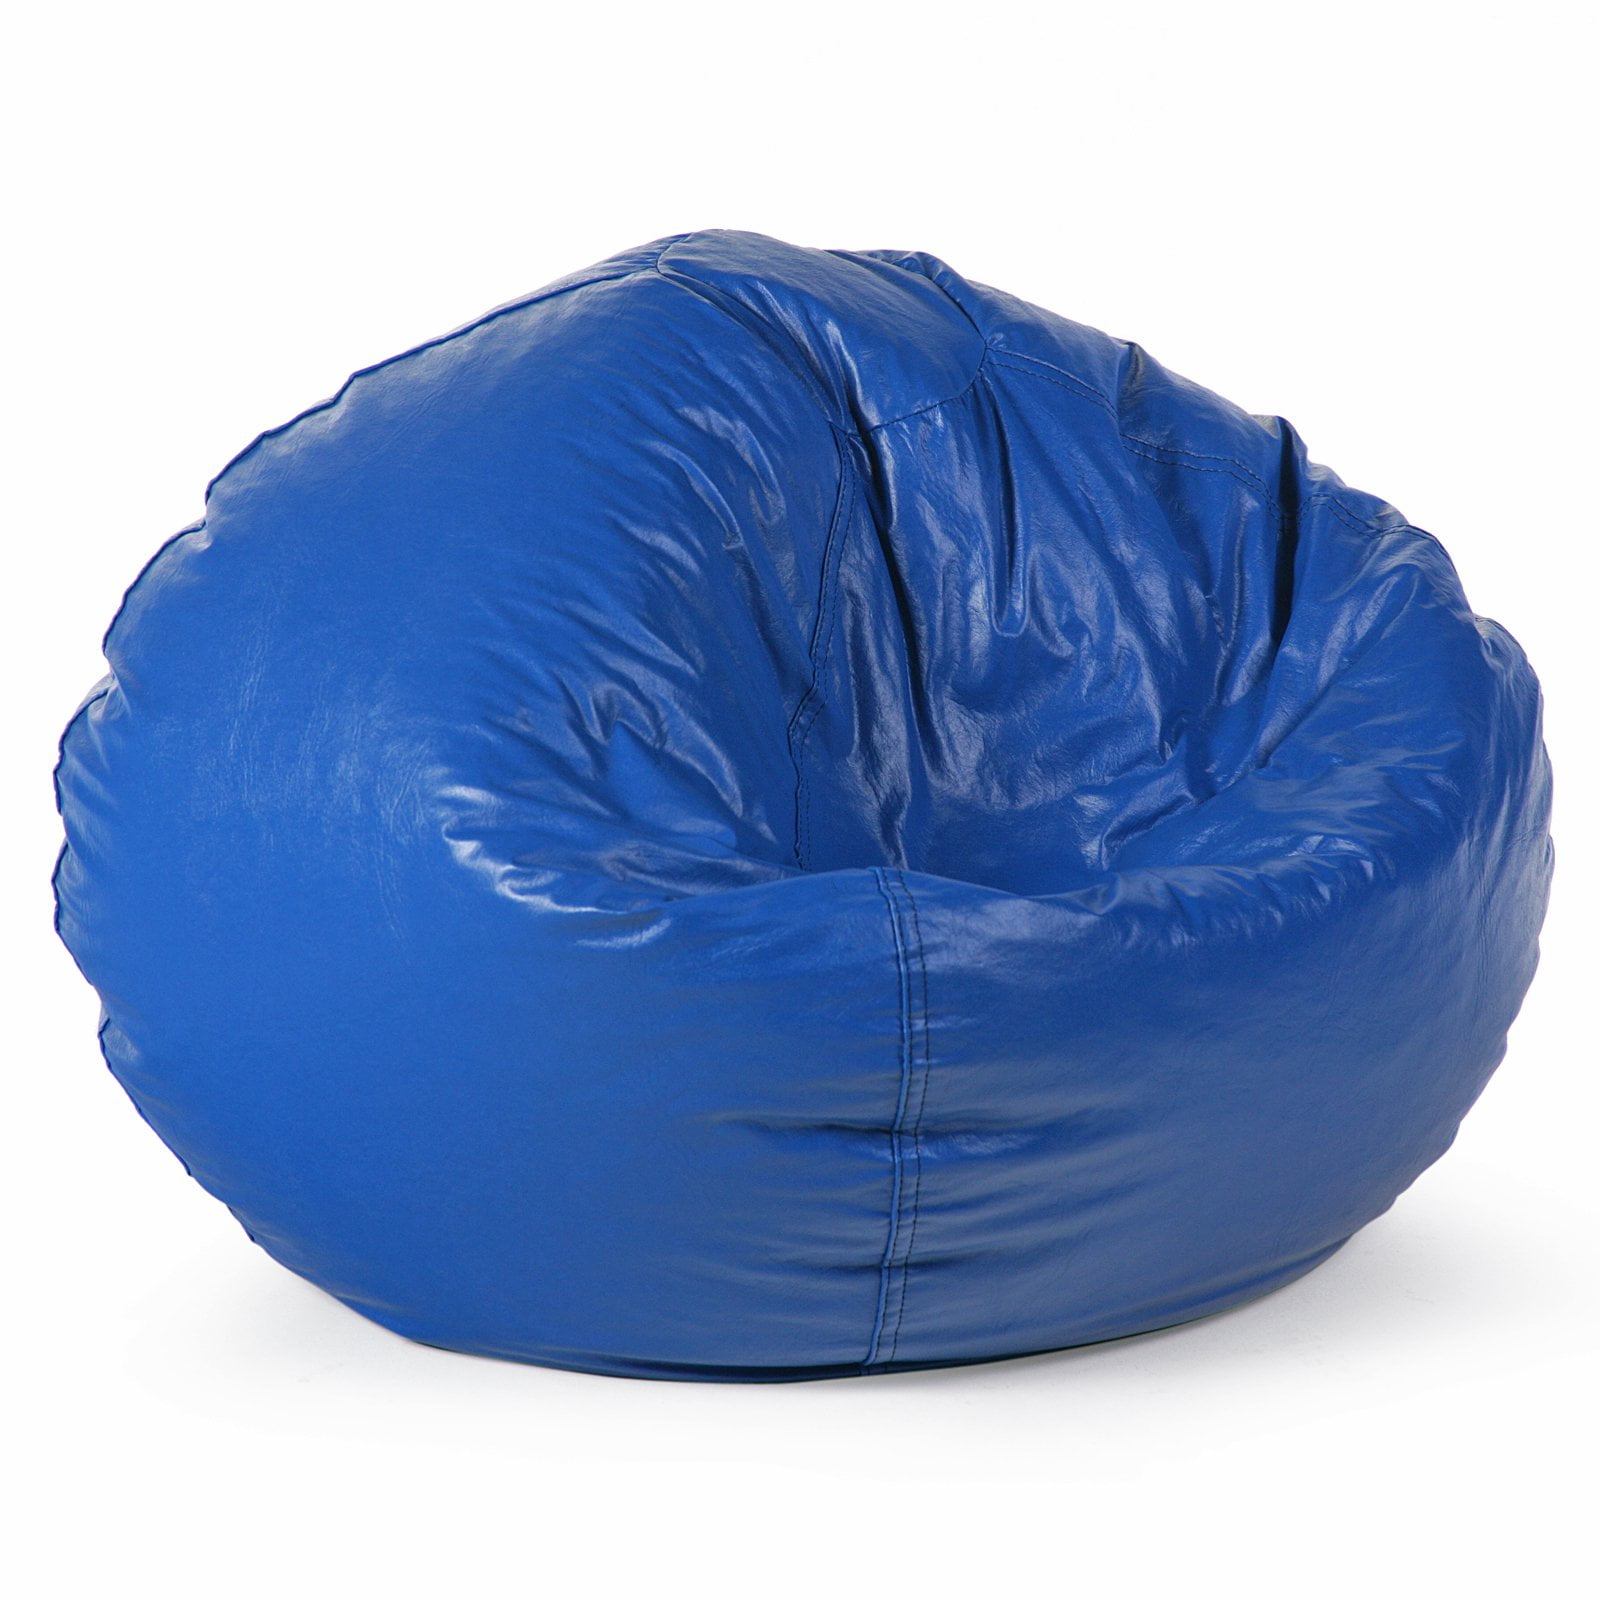 Vinyl Bean Bag Chairs For Adults : Gold Medal Fashion Large Leather